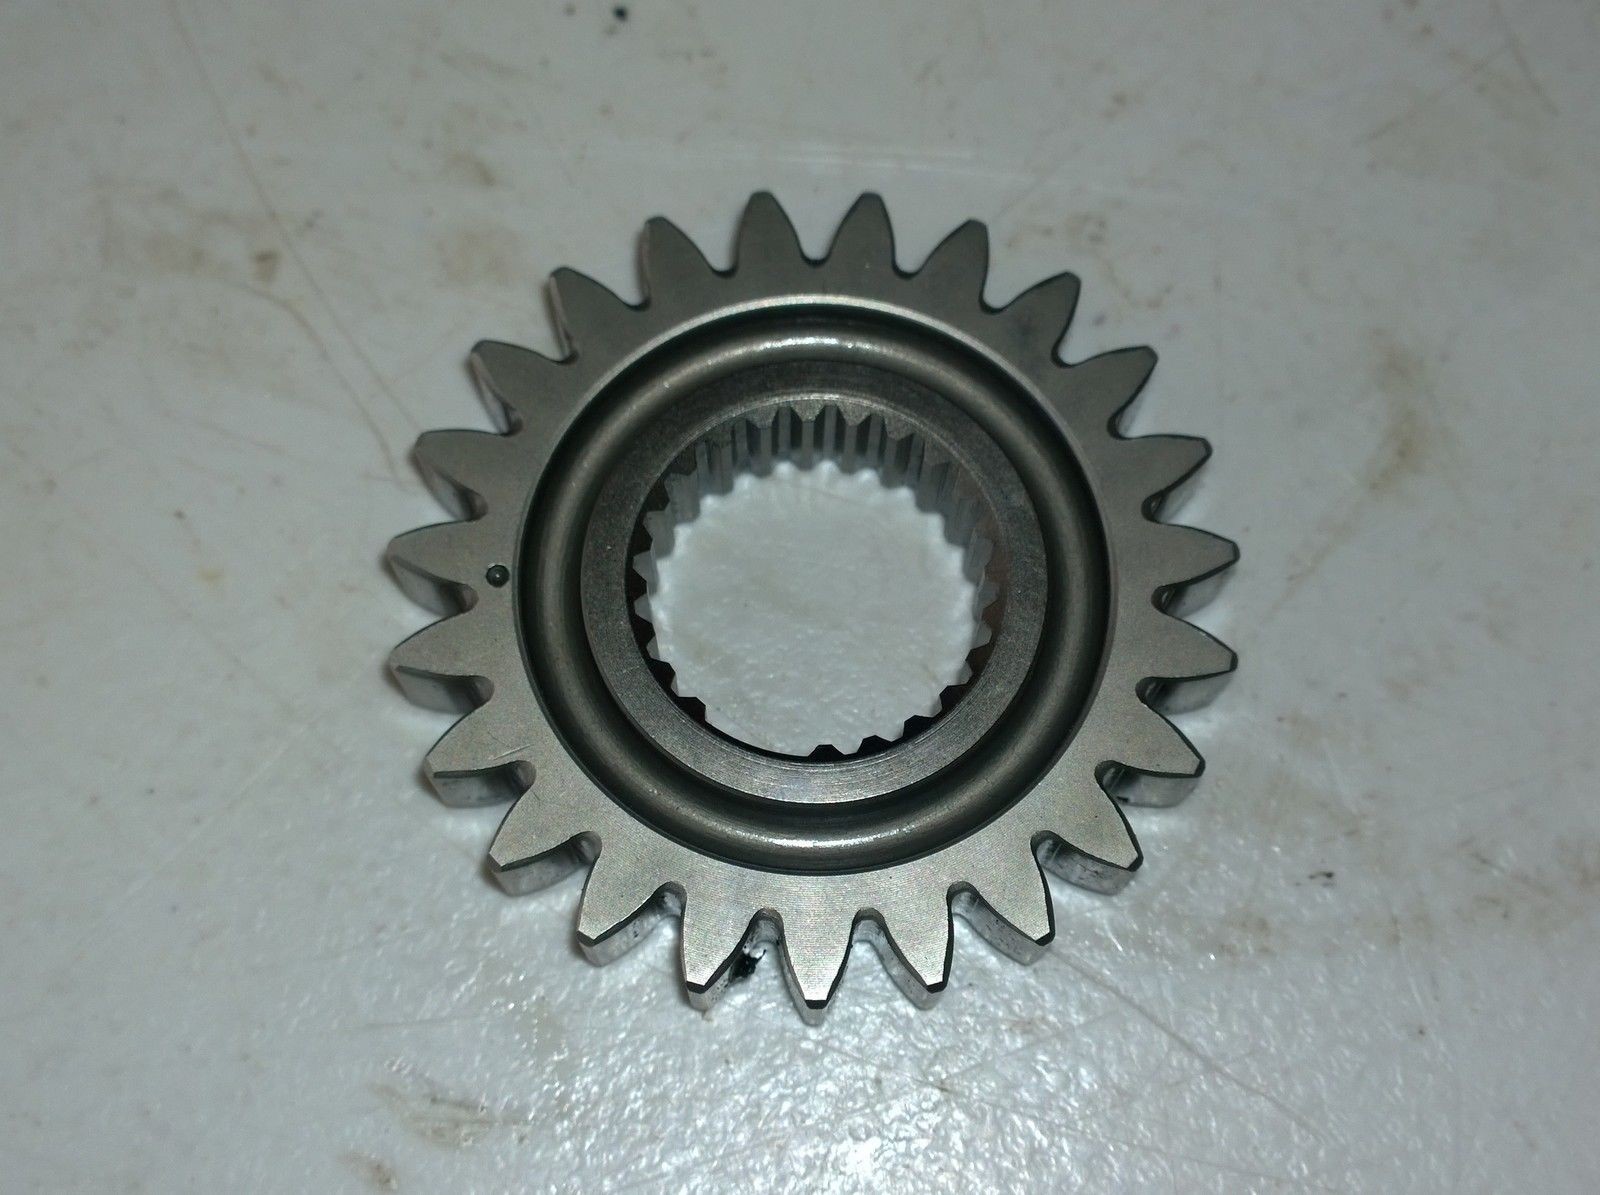 Primary Drive Gear for Honda CRF450R CRF 450 R 2009 09